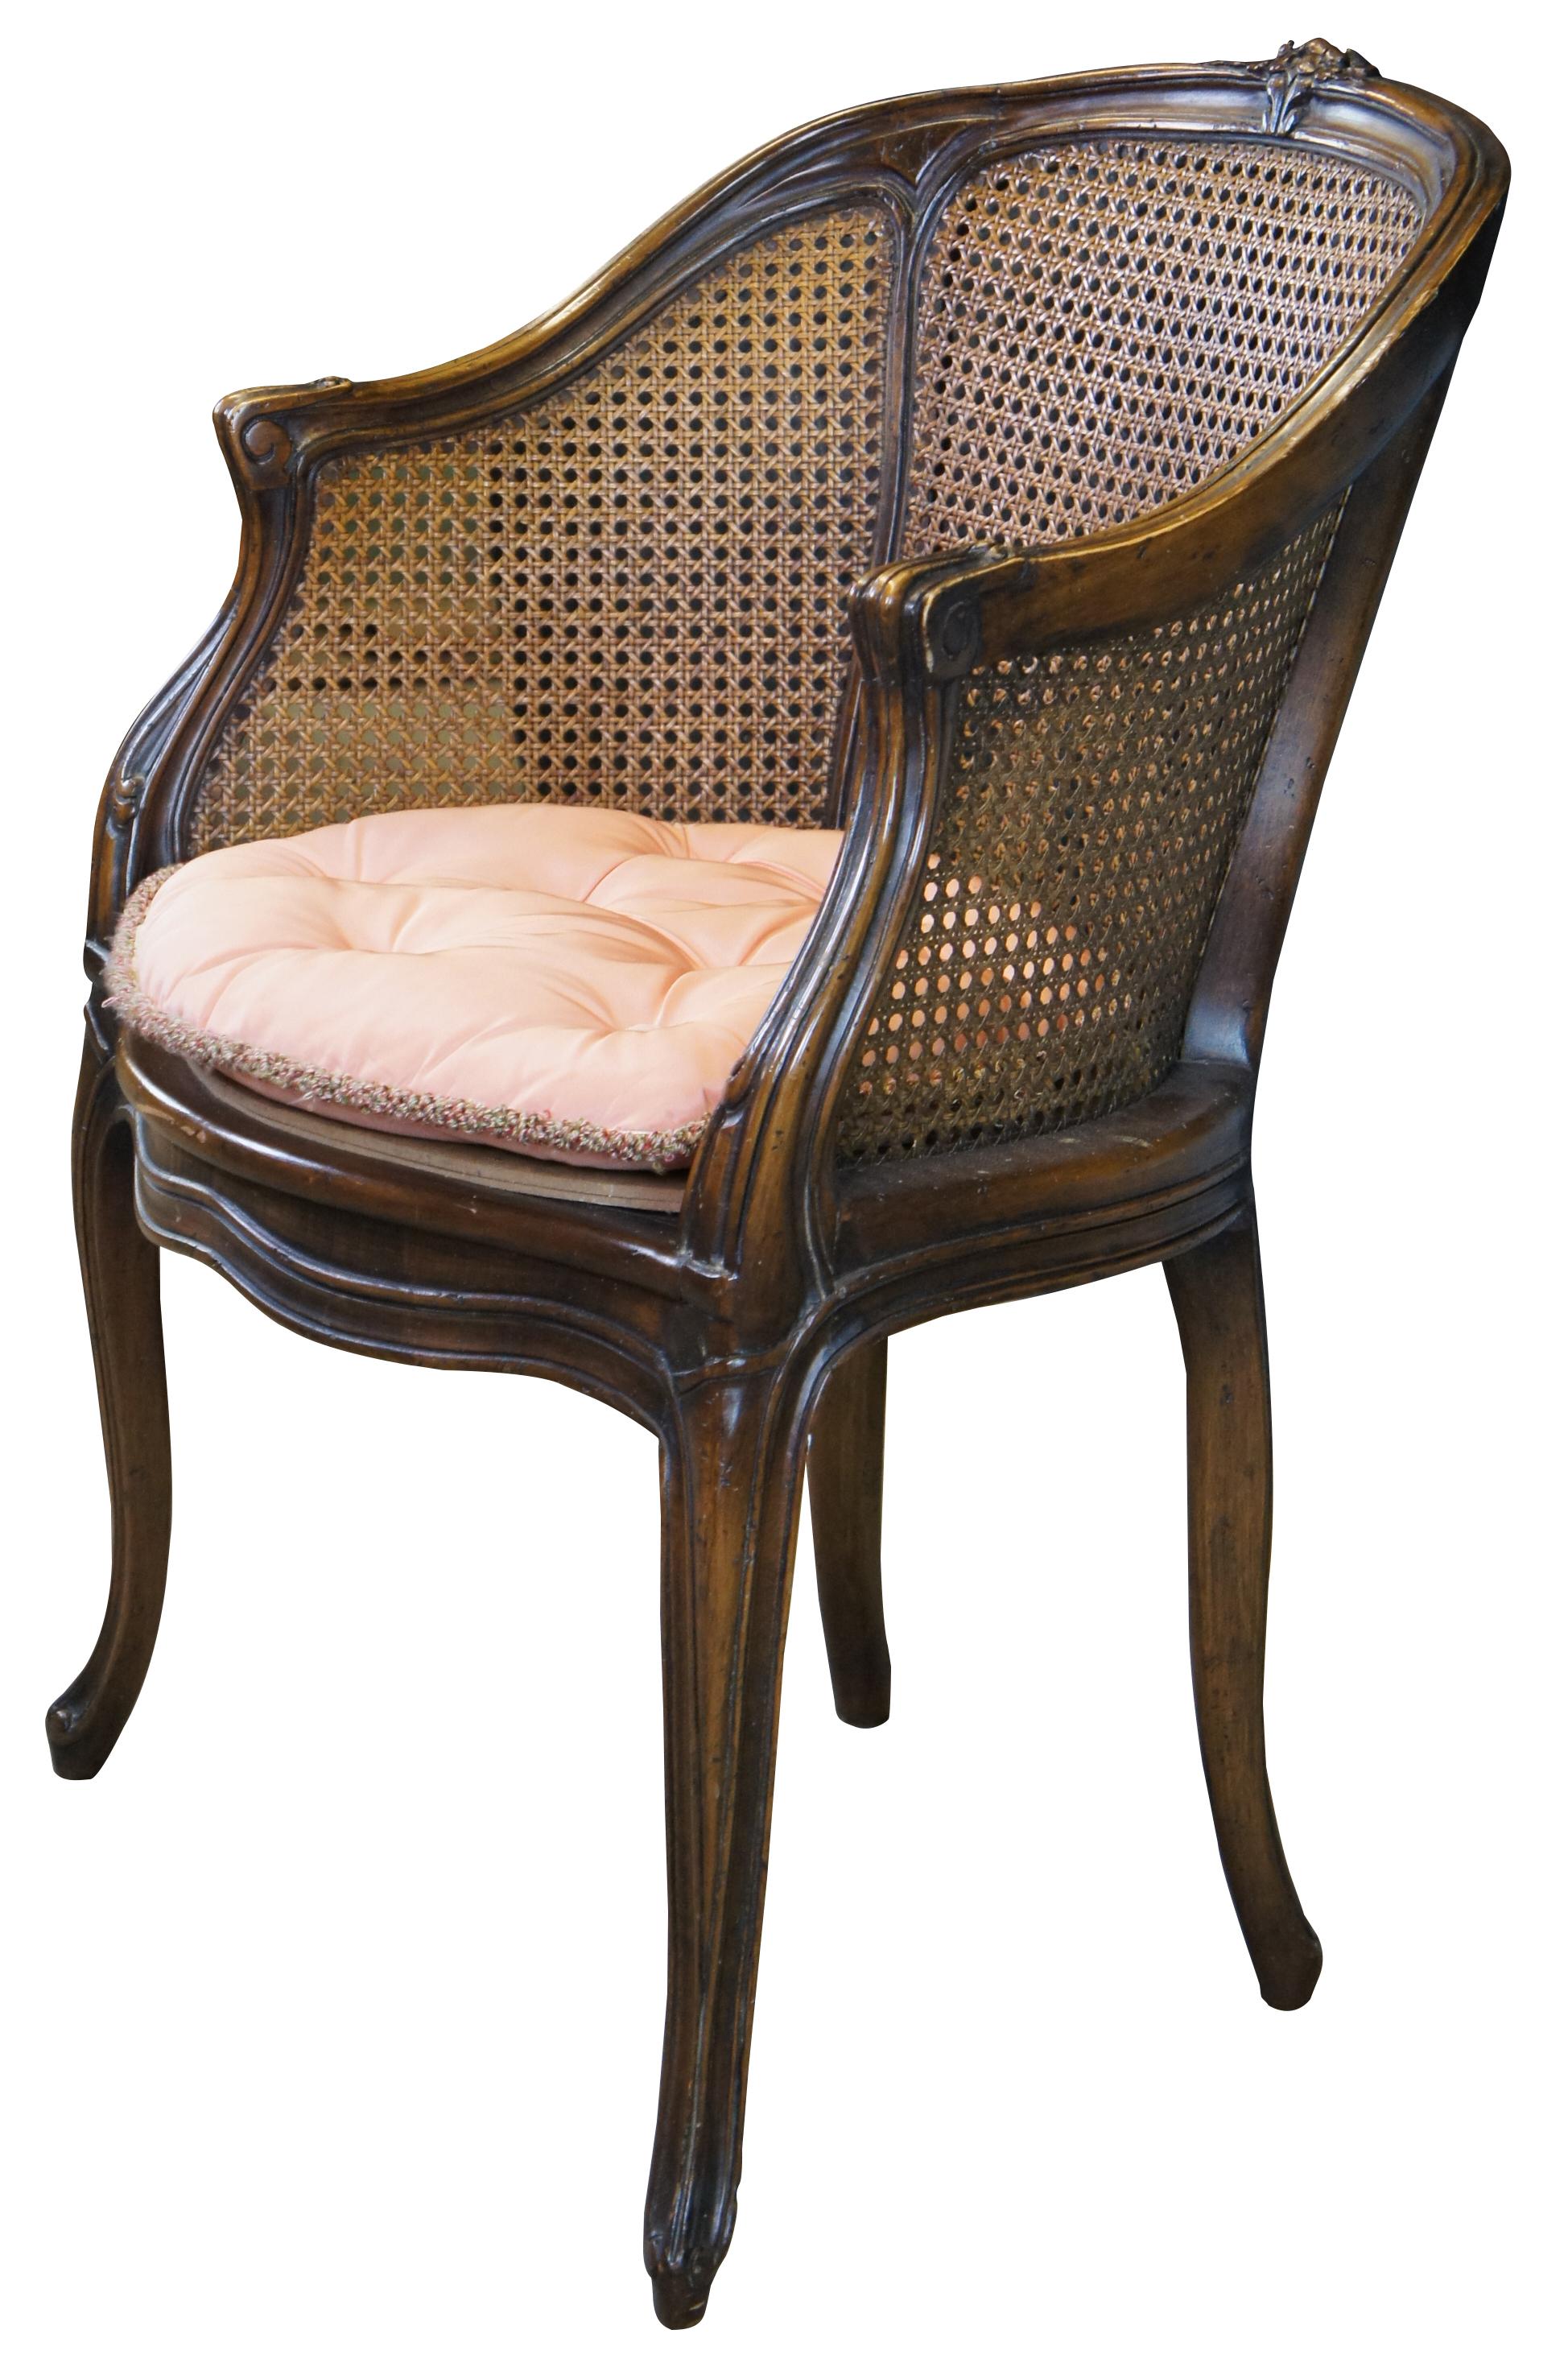 Vintage French Louis XVI style Bergere armchair. Made of walnut featuring serpentine barrel form with caned sides and back, fluted accents, and carved flower.
 